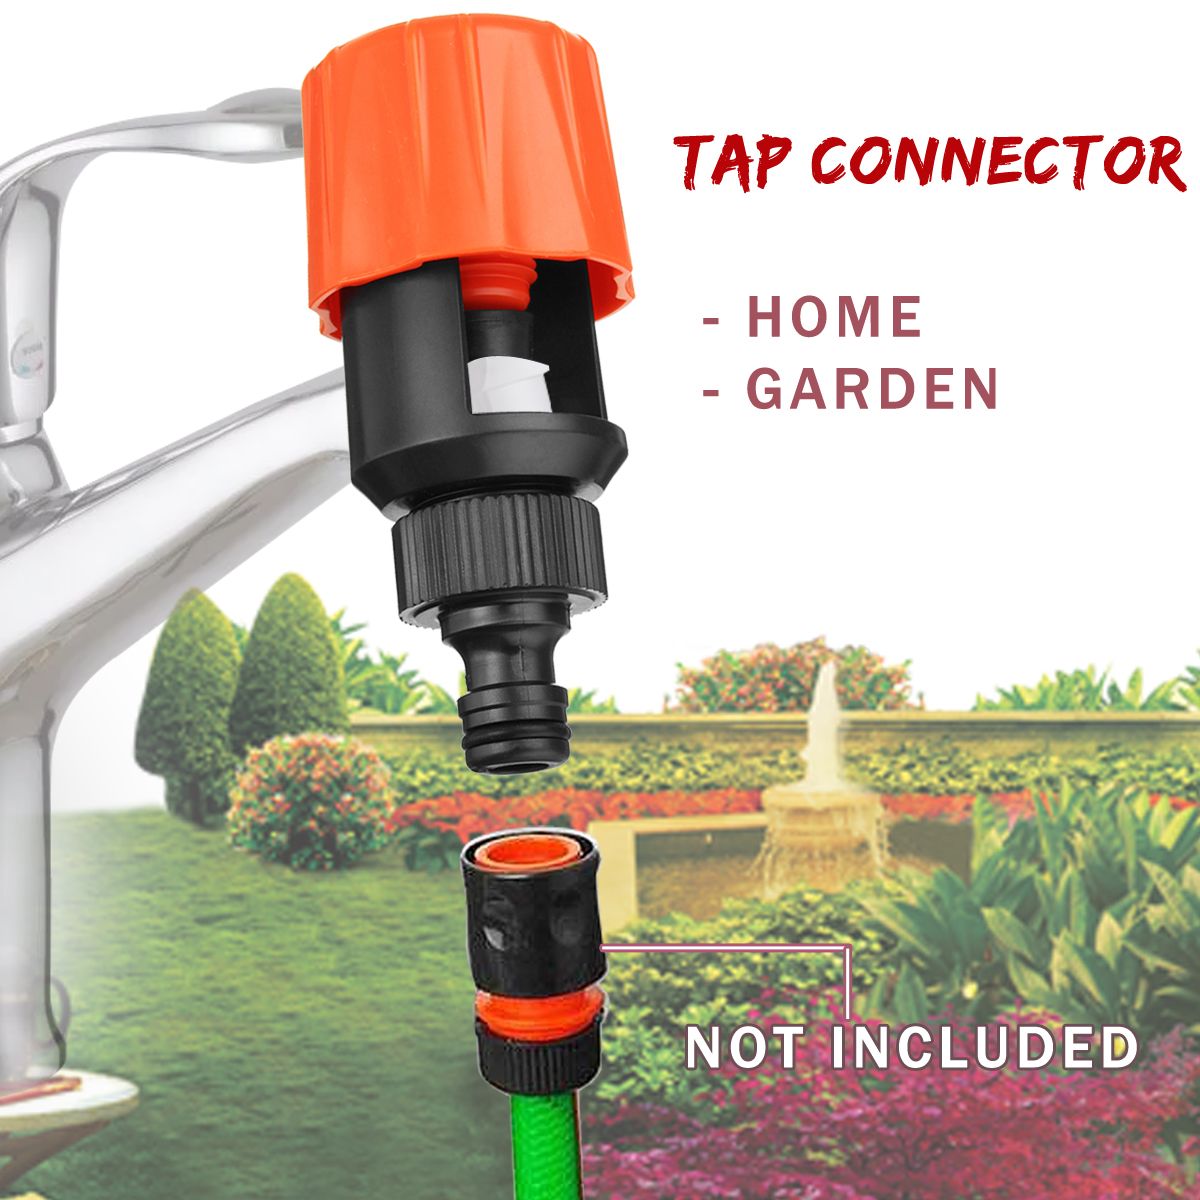 2x-Universal-Tap-Water-Hose-Pipe-Quick-Connect-Mixer-Kitchen-Garden-Tap-Adapter-1341167